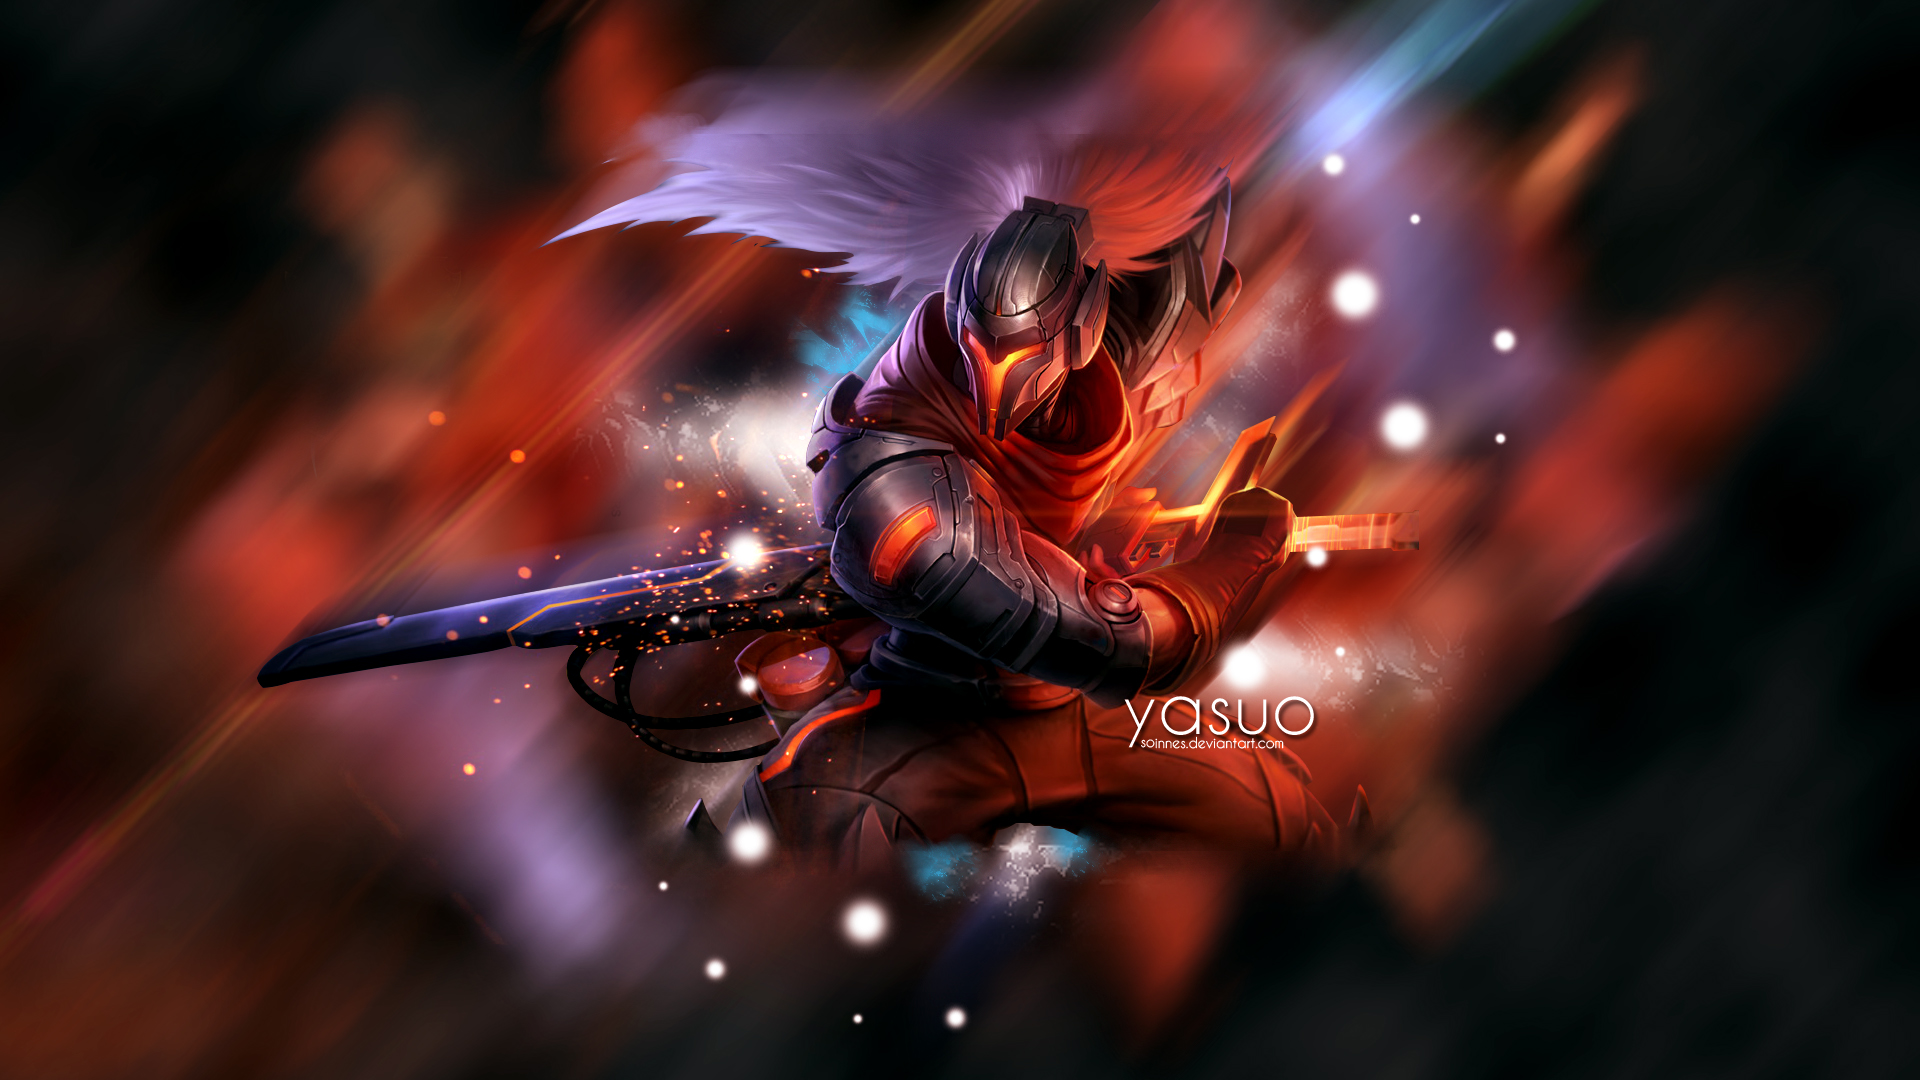 PROJECT: Yasuo wallpaper